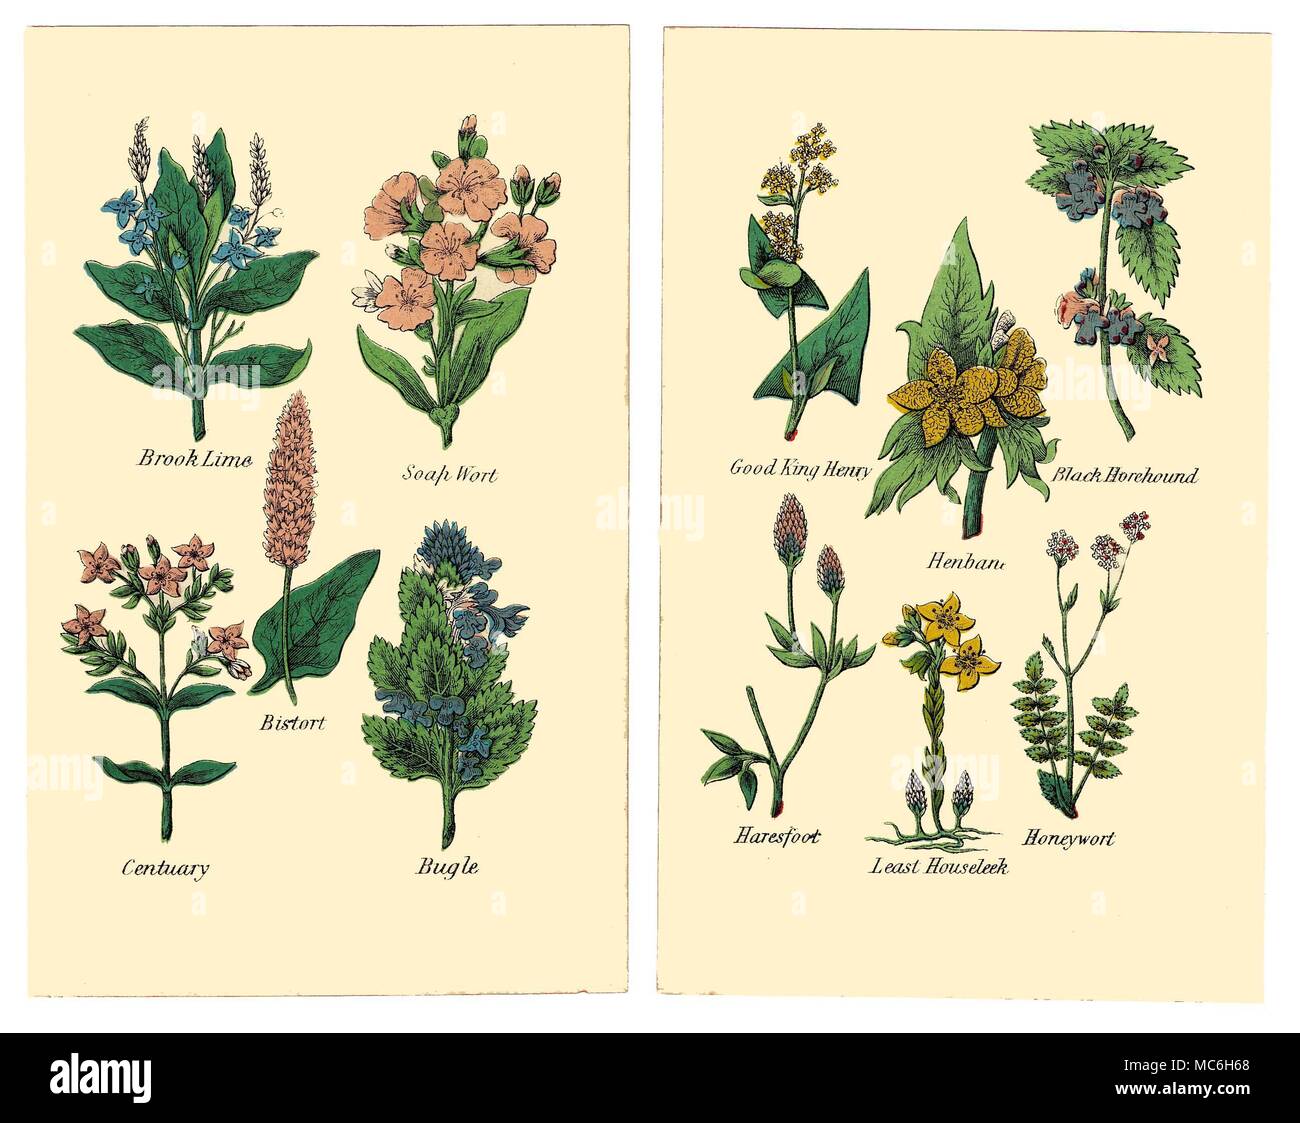 HERBS AND FLOWERS The following plants are from two plates in the 1869 Halifax edition of Matthew Robinson's The New Family Herbal. Brook Lime, Soap Wort, Bistort, Centuary, Bugle. Good King Henry, Black Horehound, Henbane, Haresfoot, Honeywort, Least Houseleek. Stock Photo